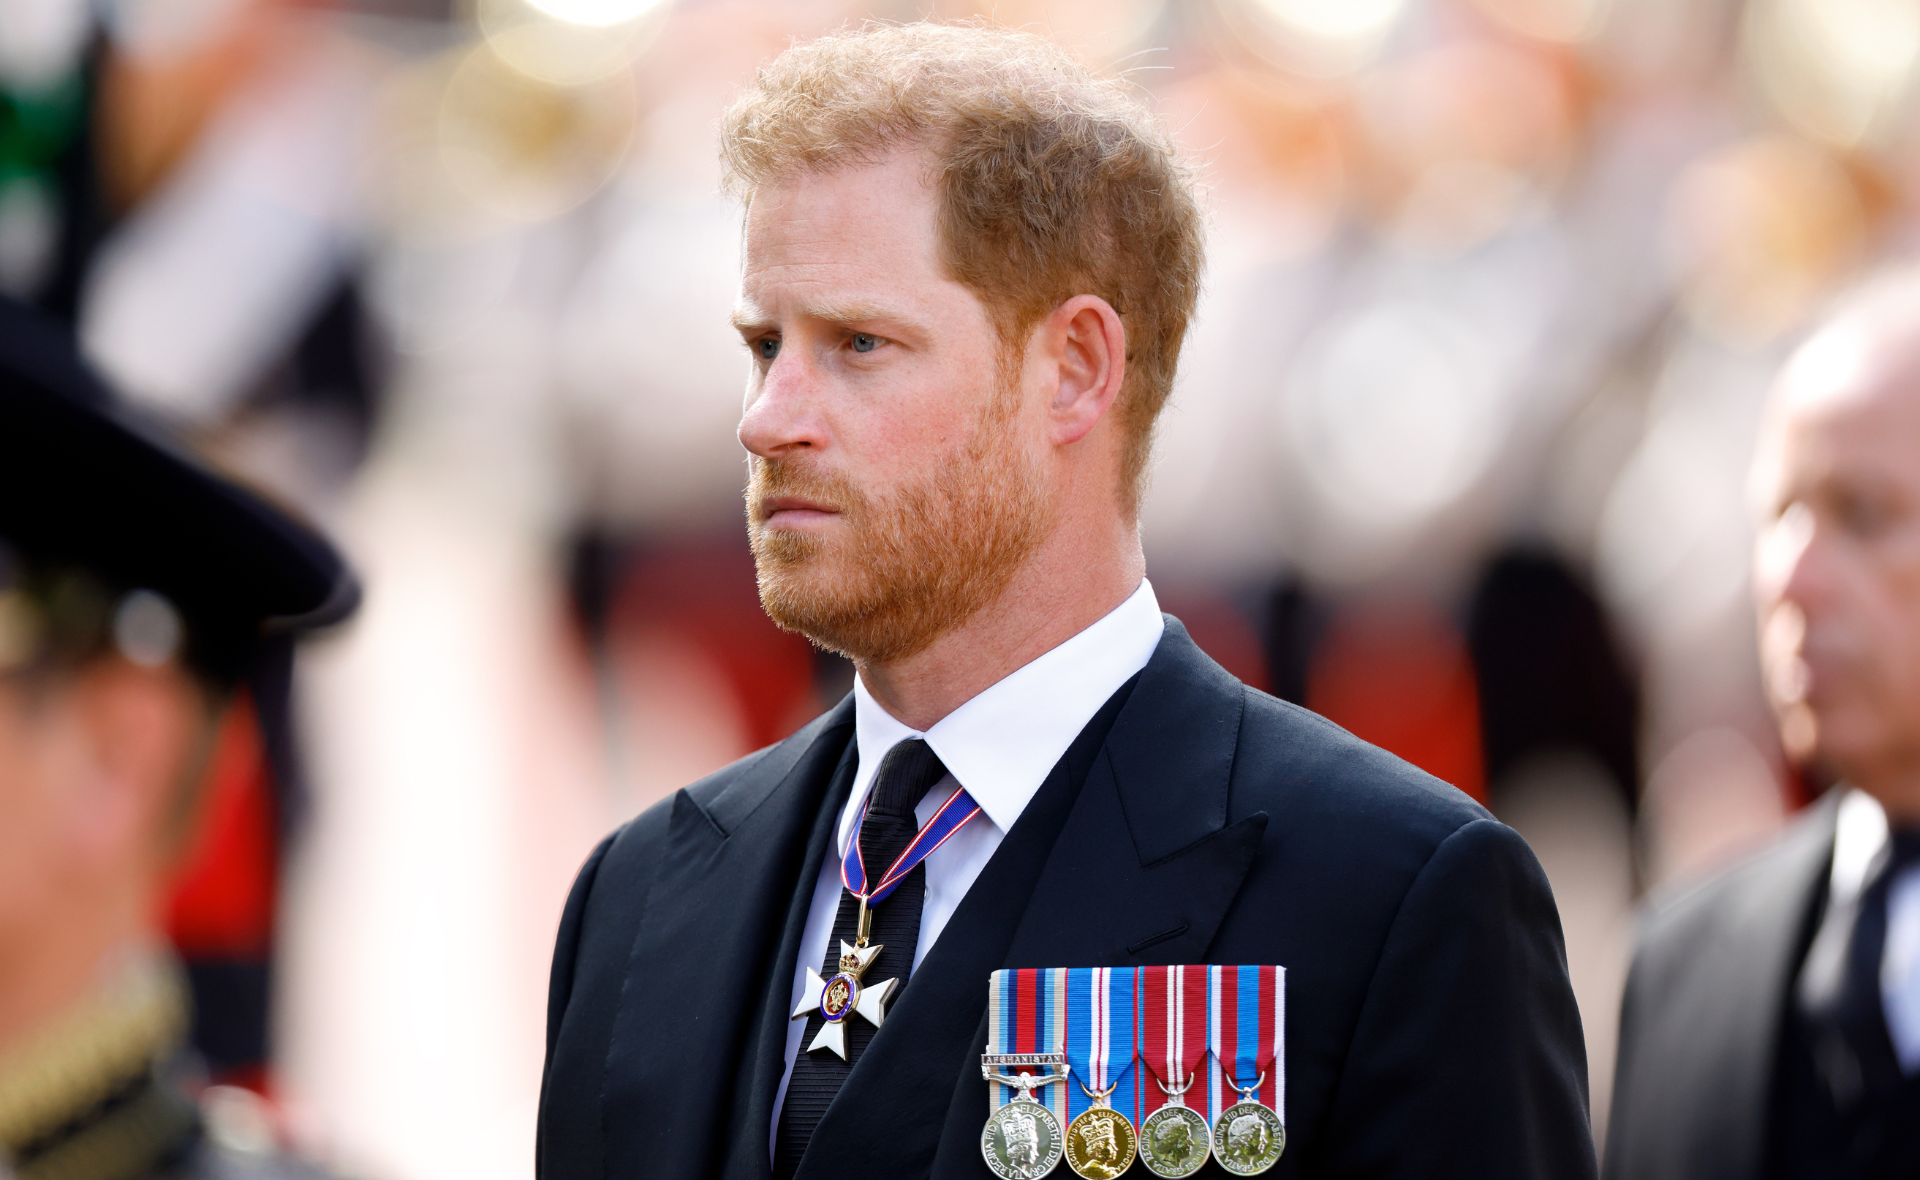 The villain arc: Prince Harry makes shocking claims ahead of his memoir release